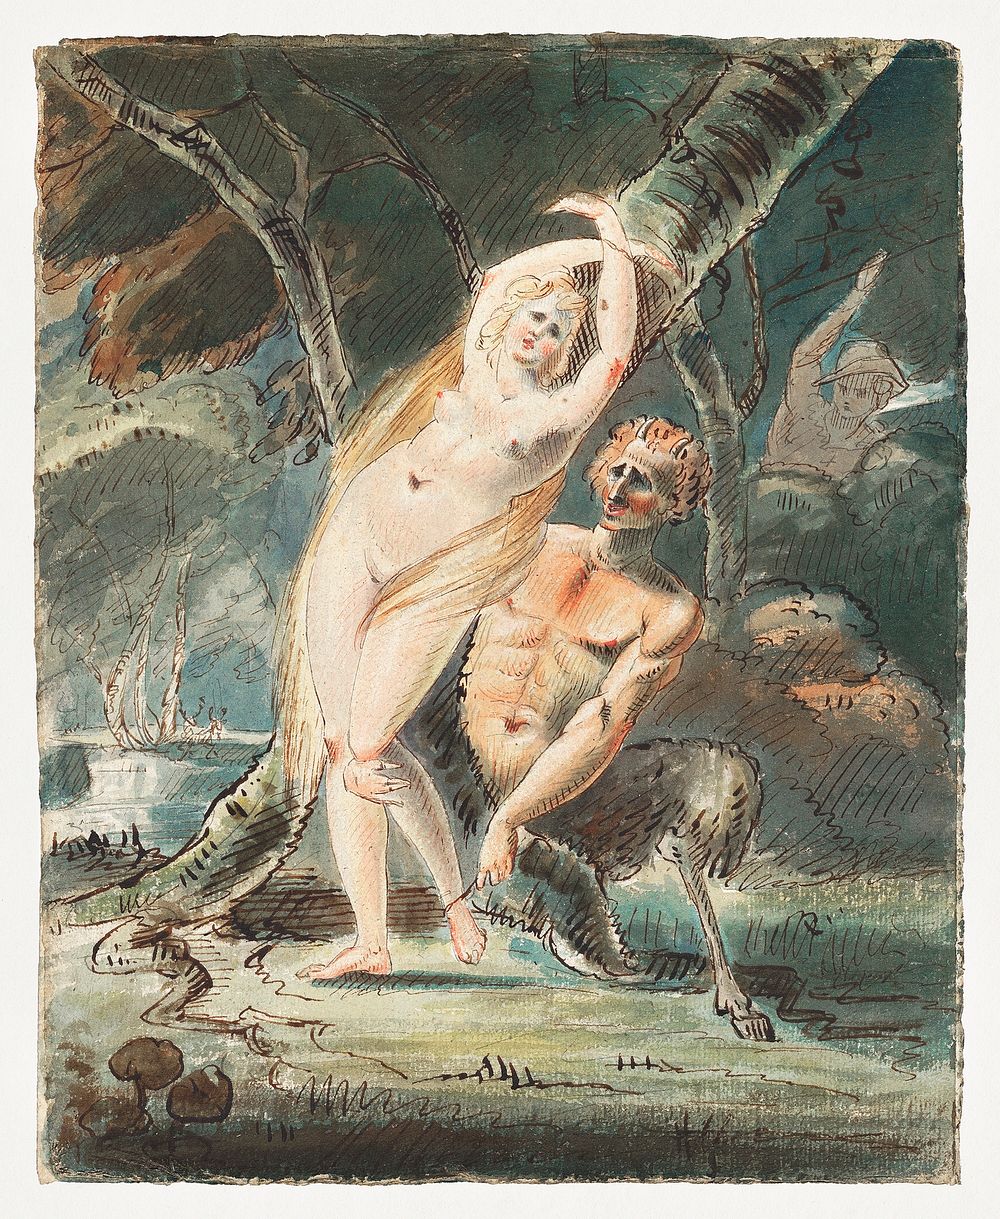 Sensual nude illustration, Amymone with a Lecherous Satyr (1770&ndash;1780) by William Hamilton. Original from The MET…